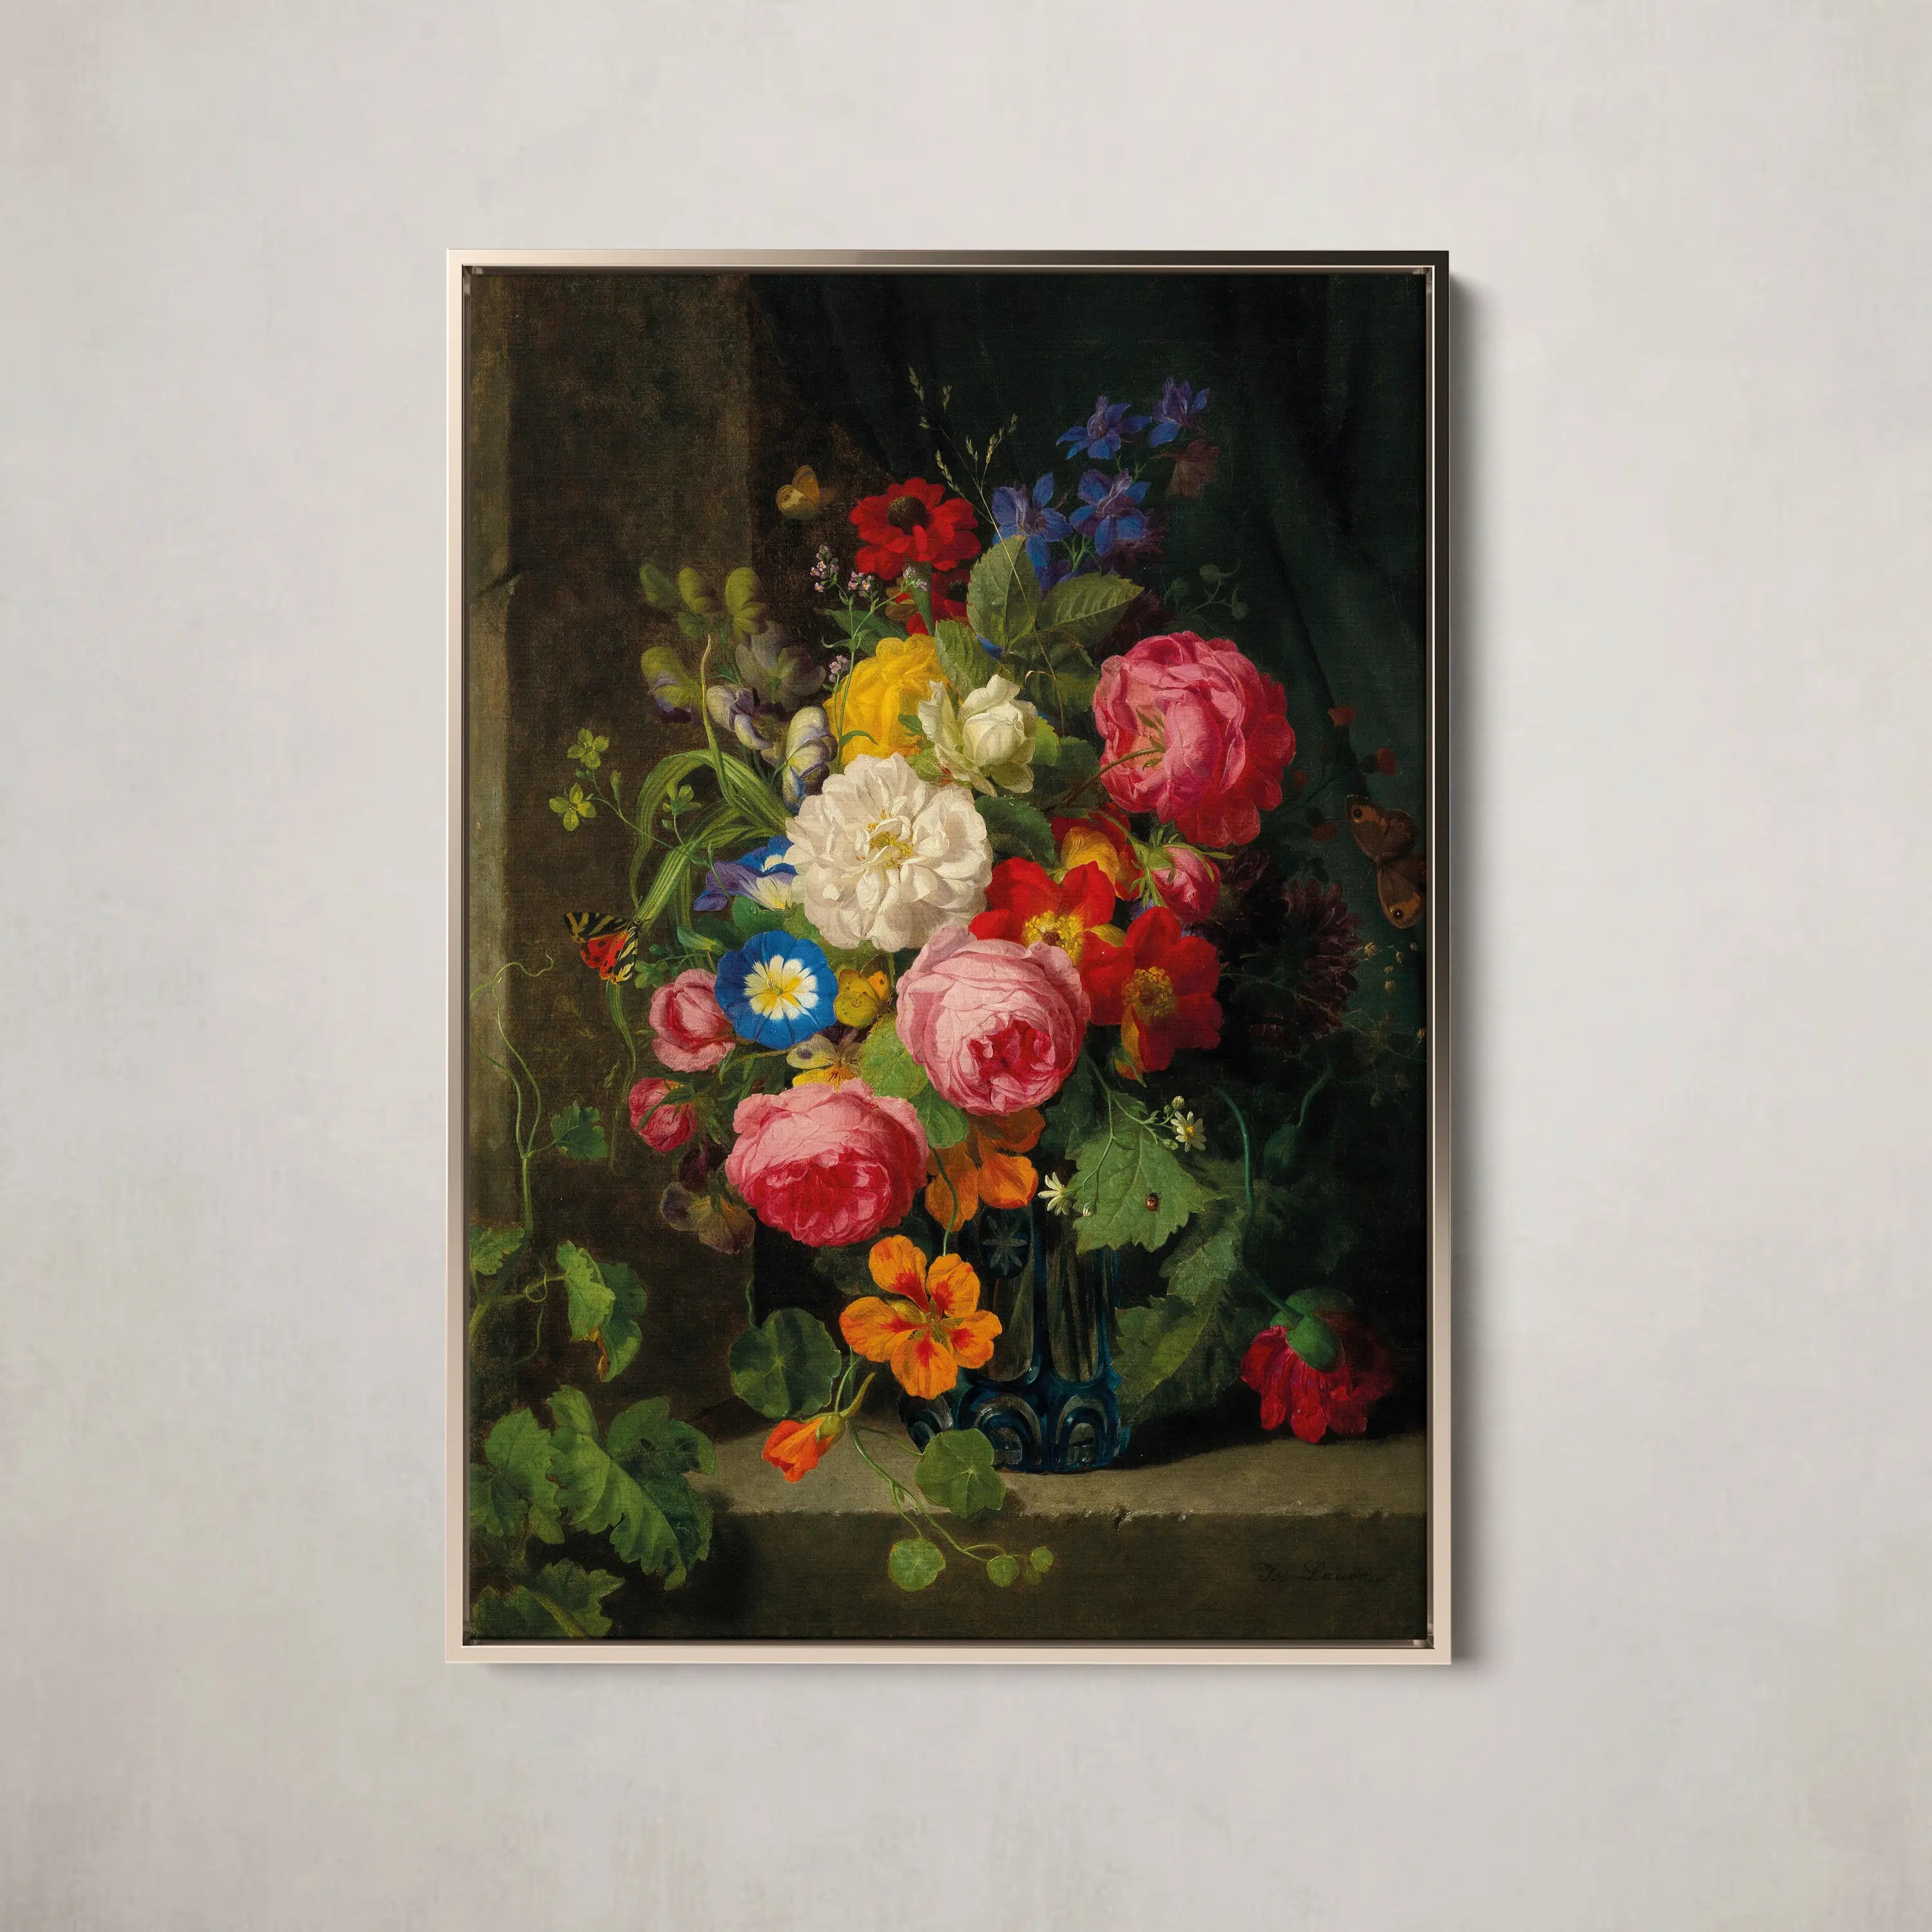 A Large Bouquet of Flowers with Roses, Nasturtium and Butterflies by Josef Lauer